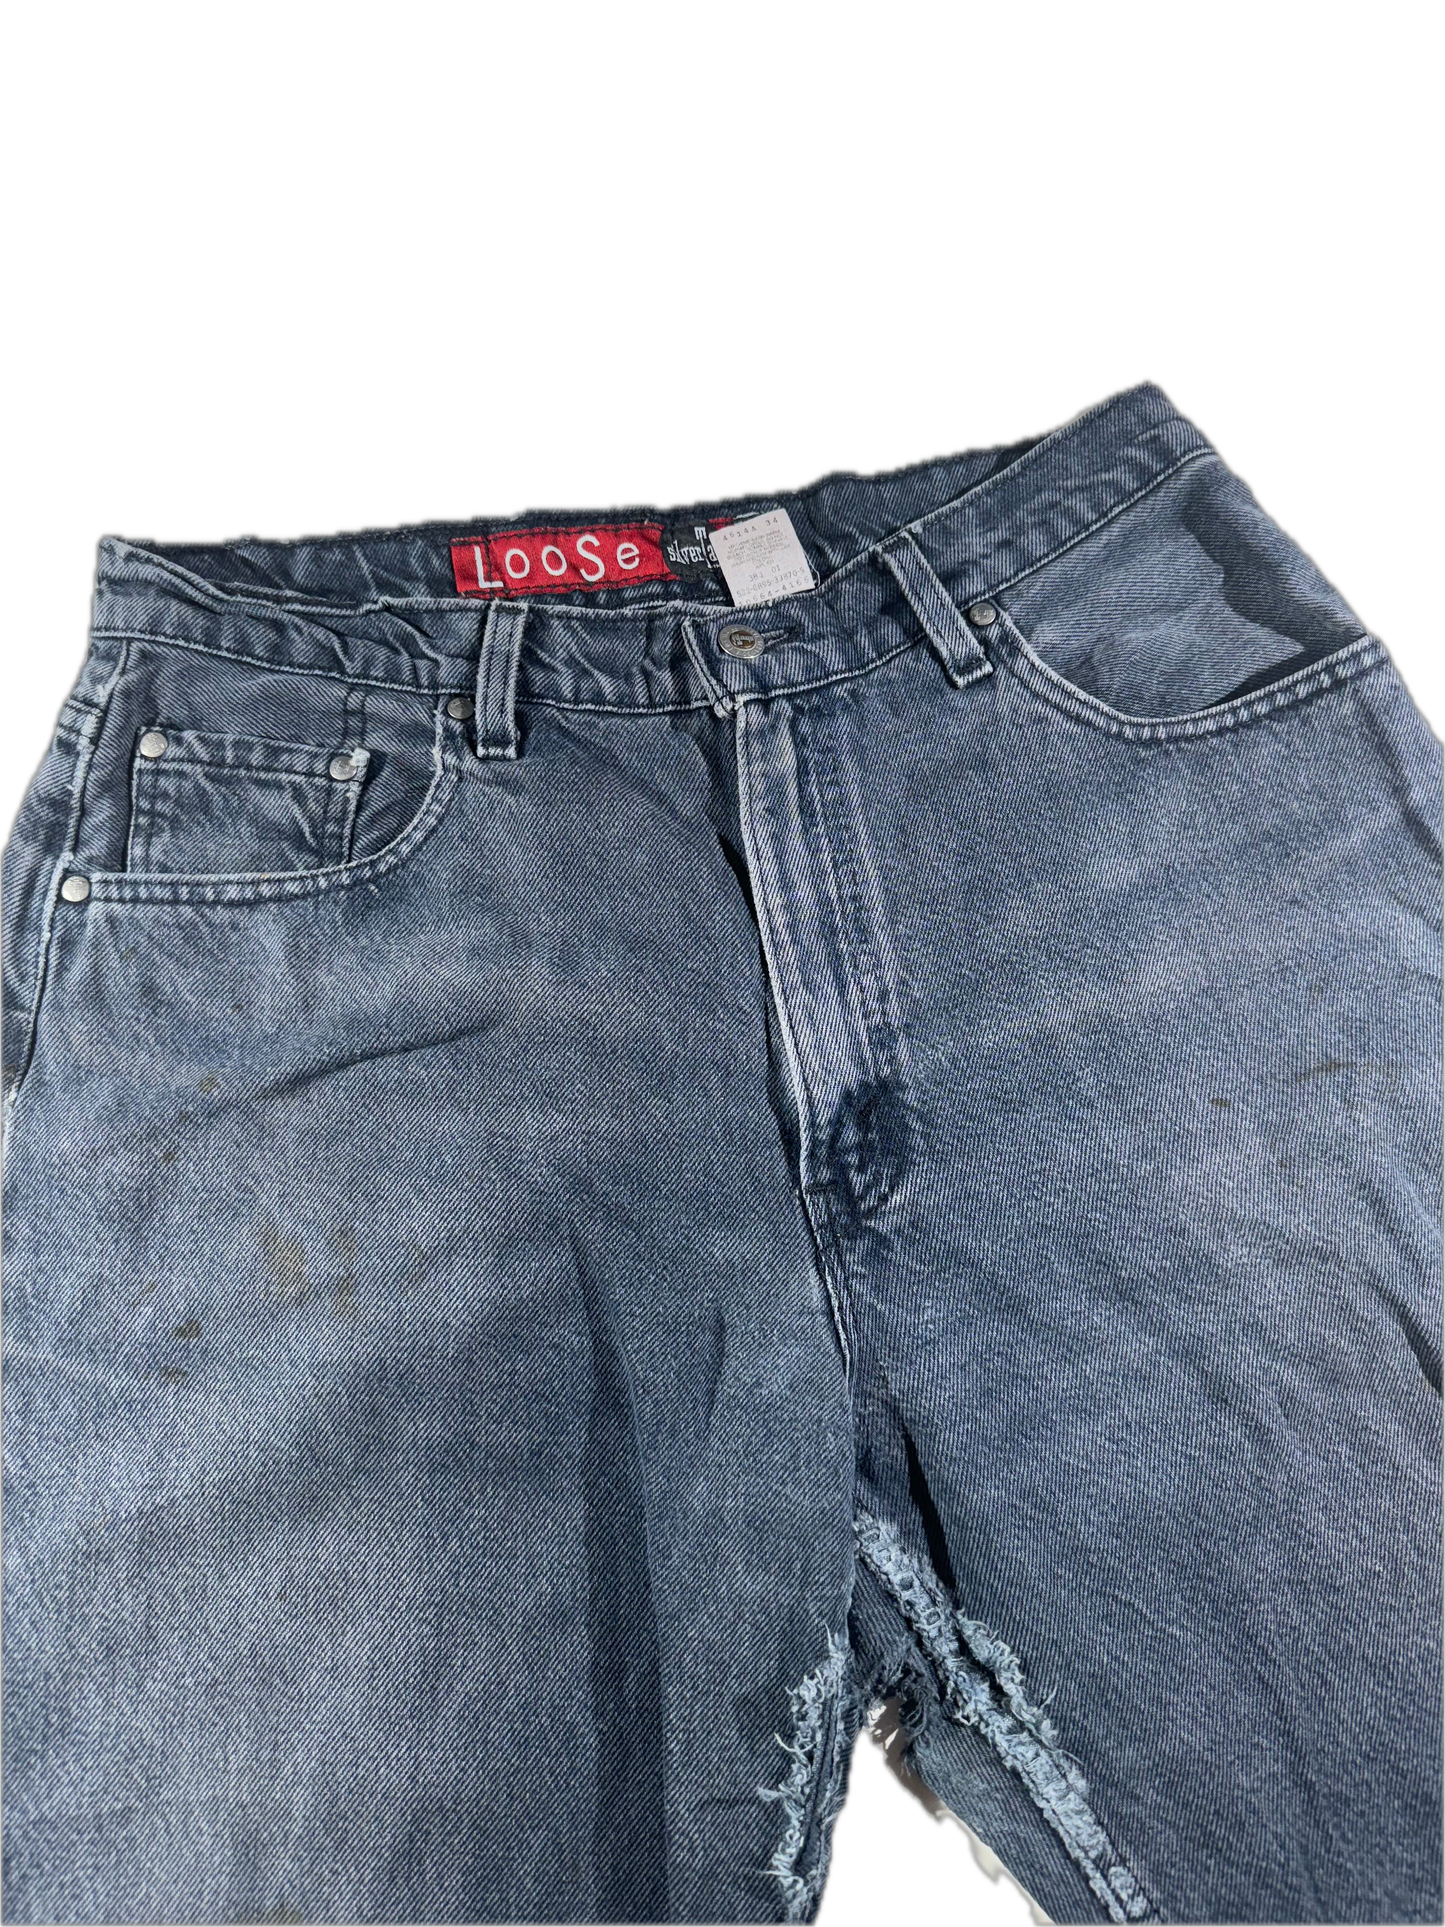 Vintage Levis Silver Tab Jeans Faded Grey Black USA Made